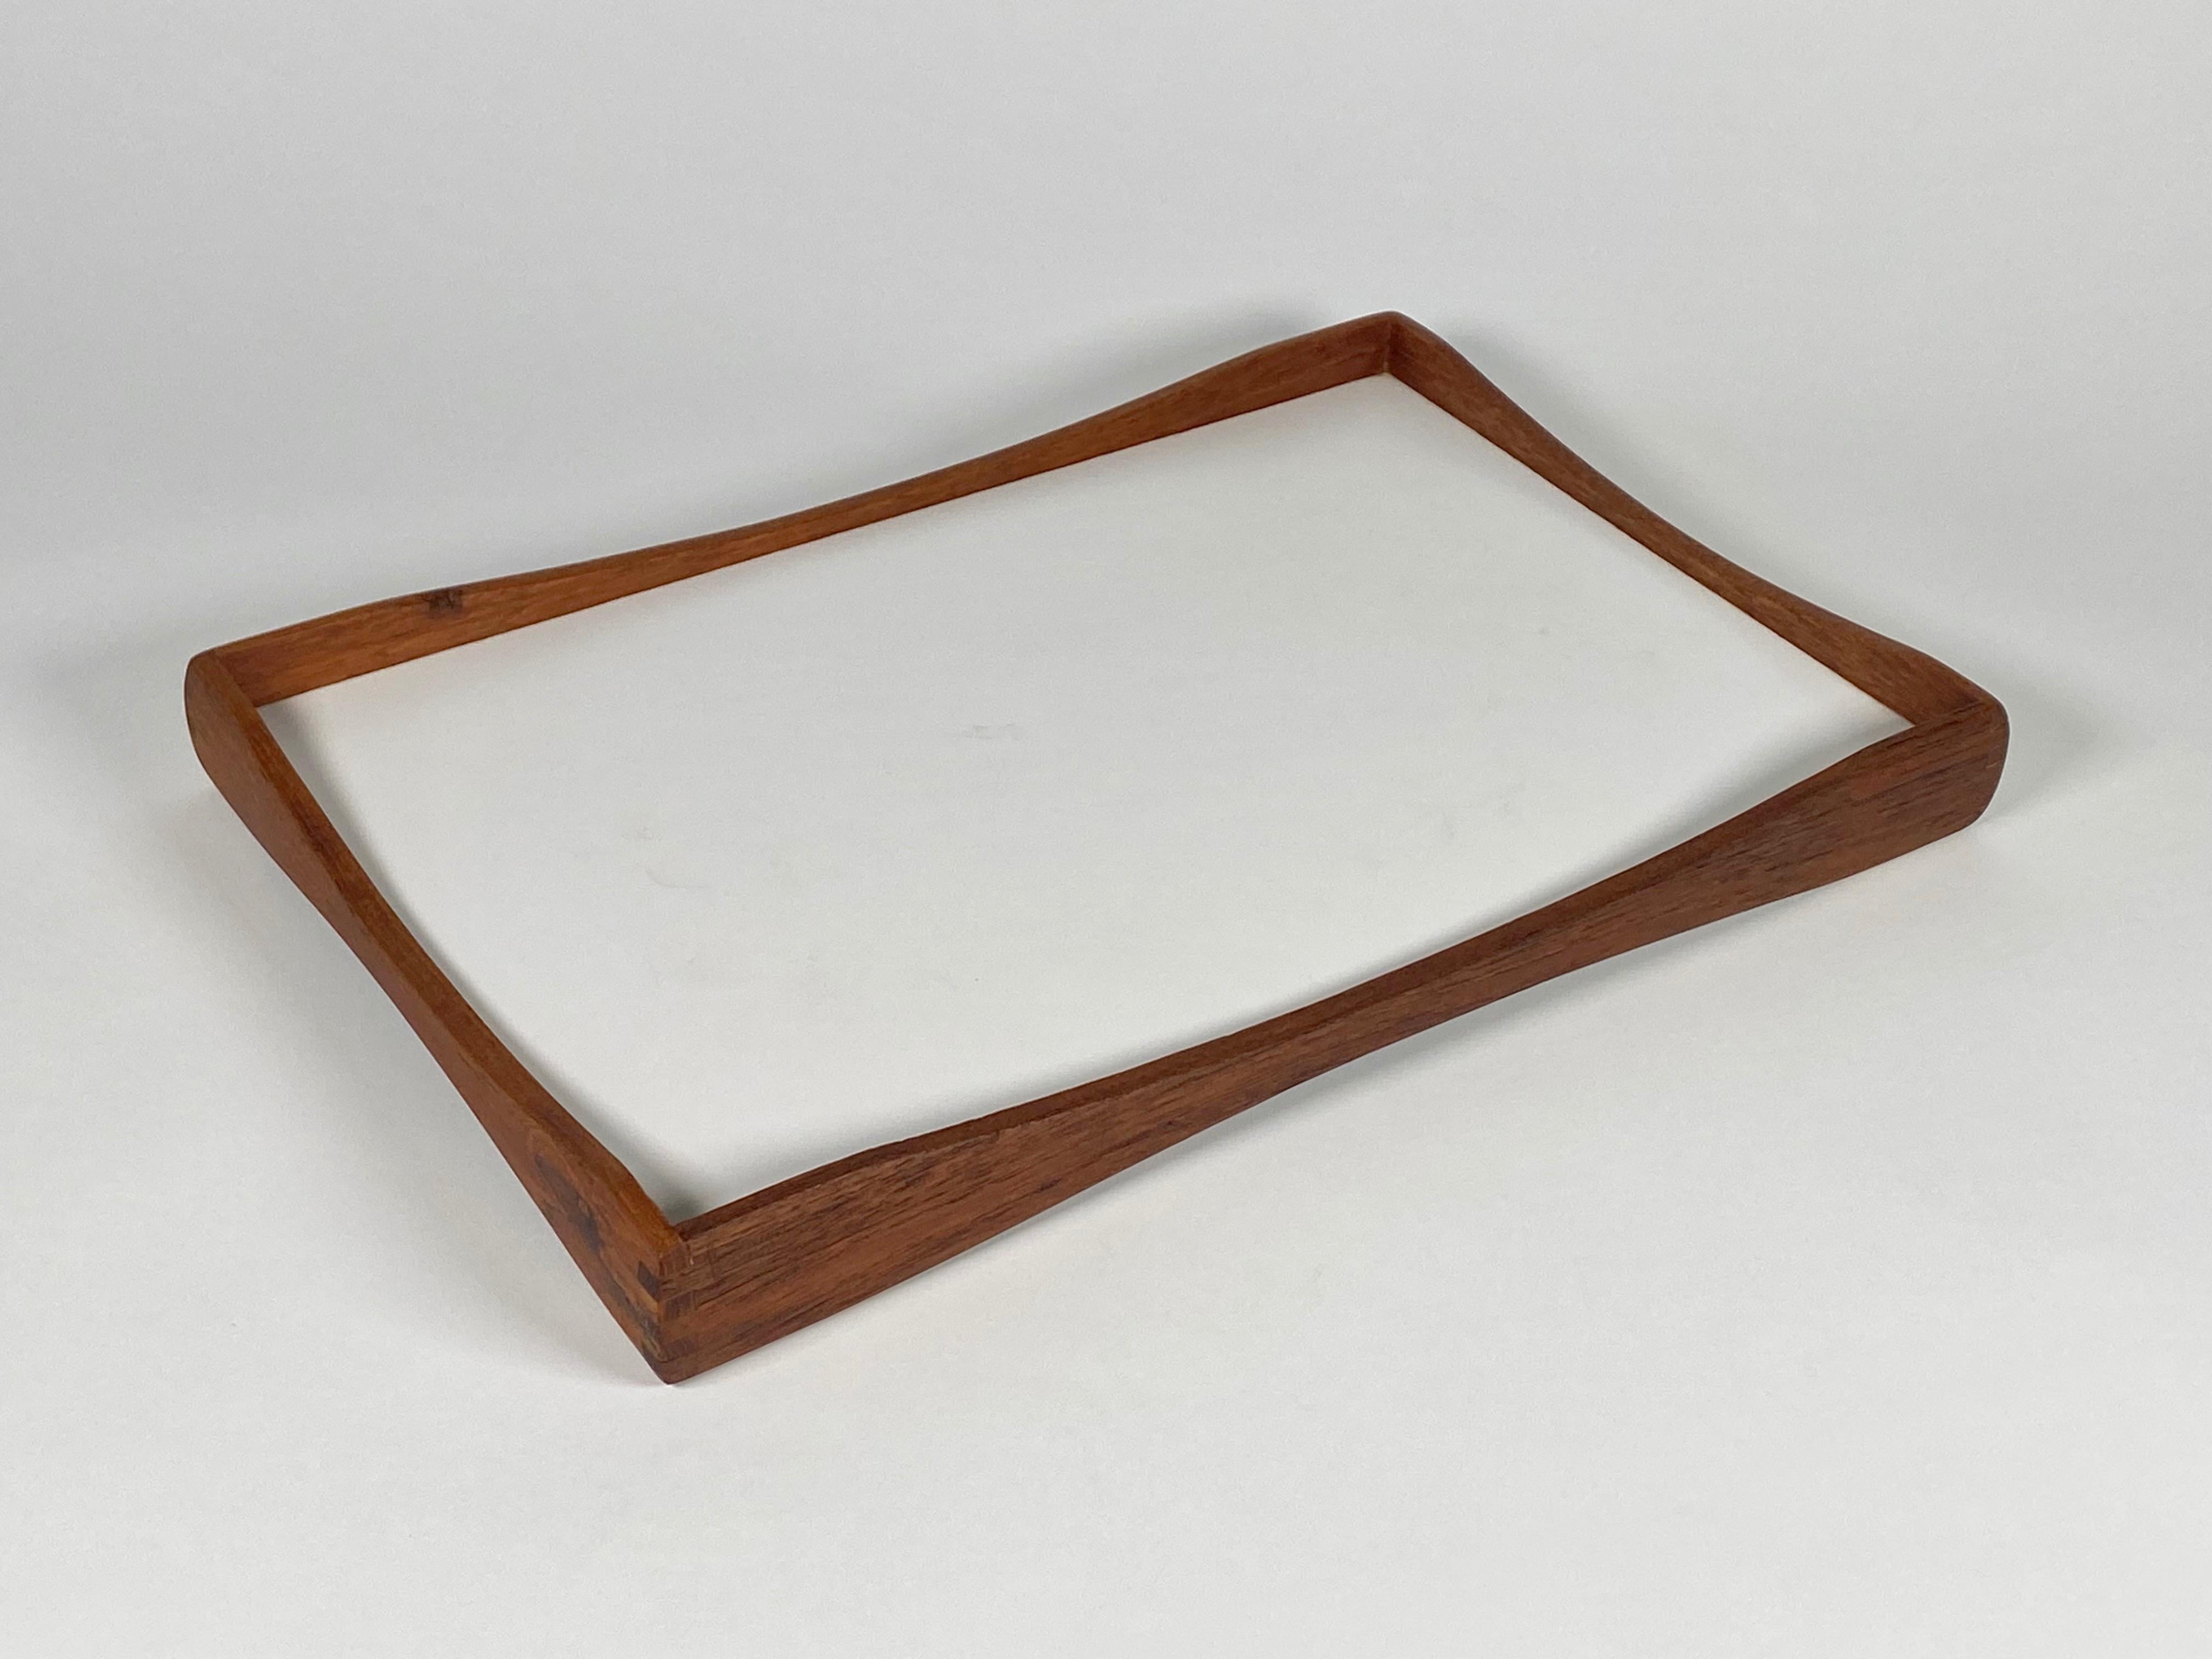 Double sided serving tray with black and white laminate surfaces on either side, the frame is constructed of  teak with gently raised ends starting in the middle and finishing with interlocking joinery. Rich color to the teak with hints of black in